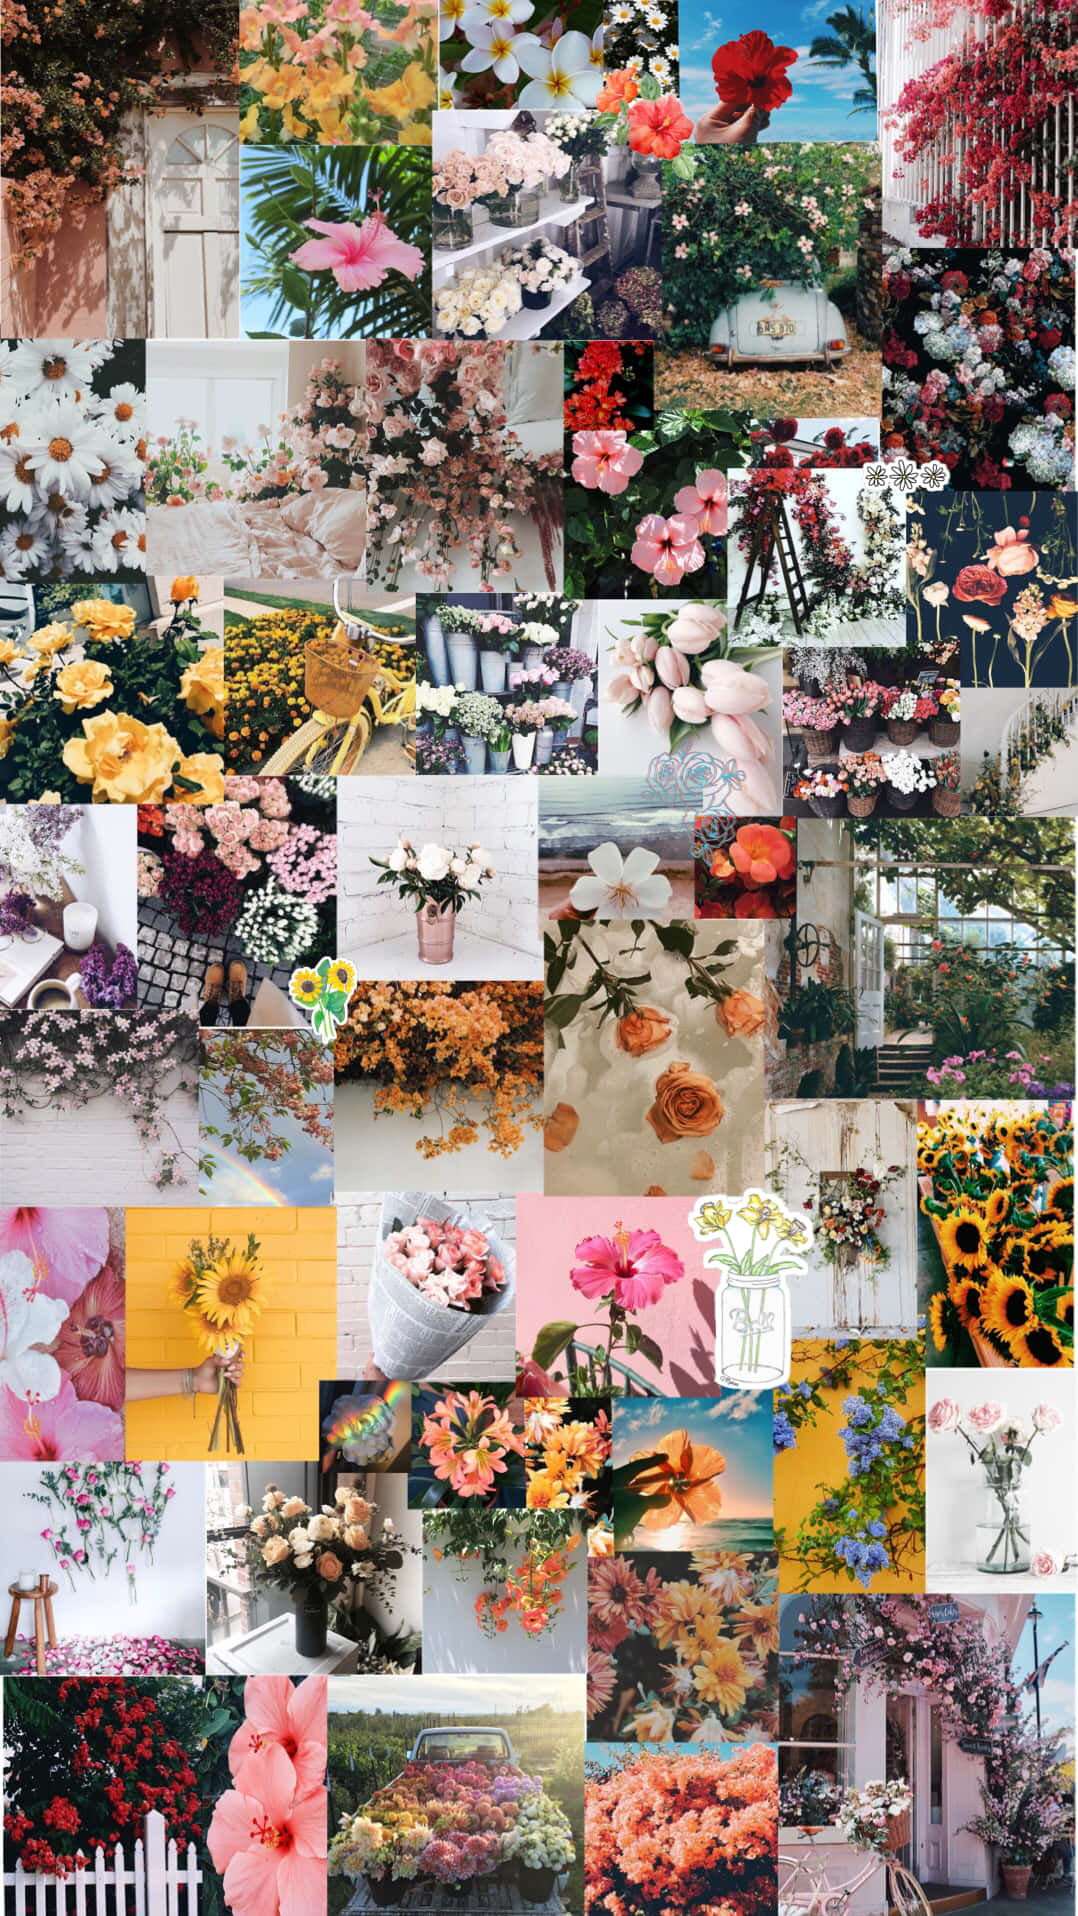 Bring floral charm and character to your smartphone with a vibrant, floral aesthetic Wallpaper